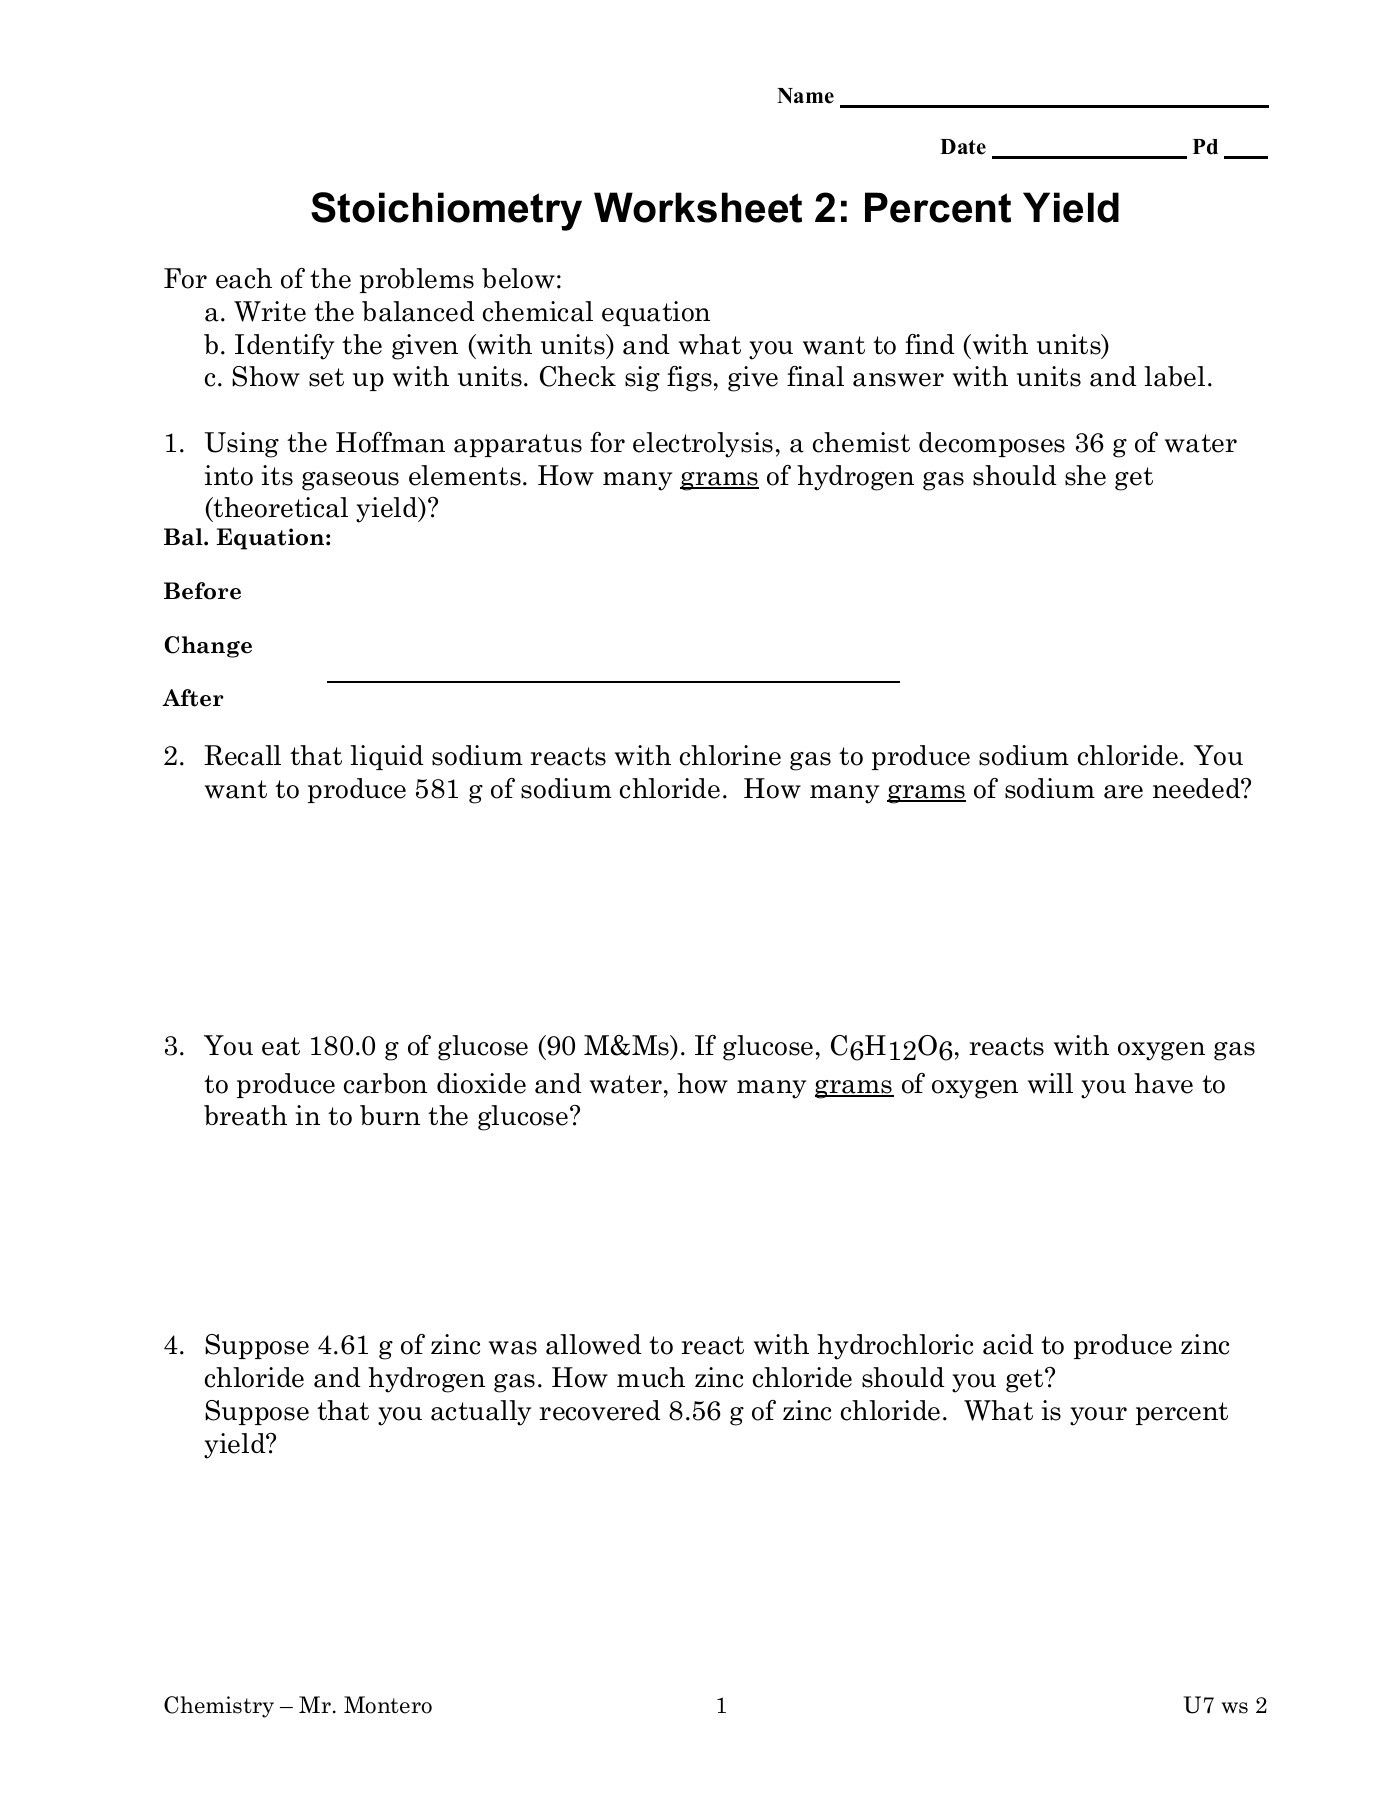 Stoichiometry Worksheet 1 Answers Language Worksheet Pictures 2020